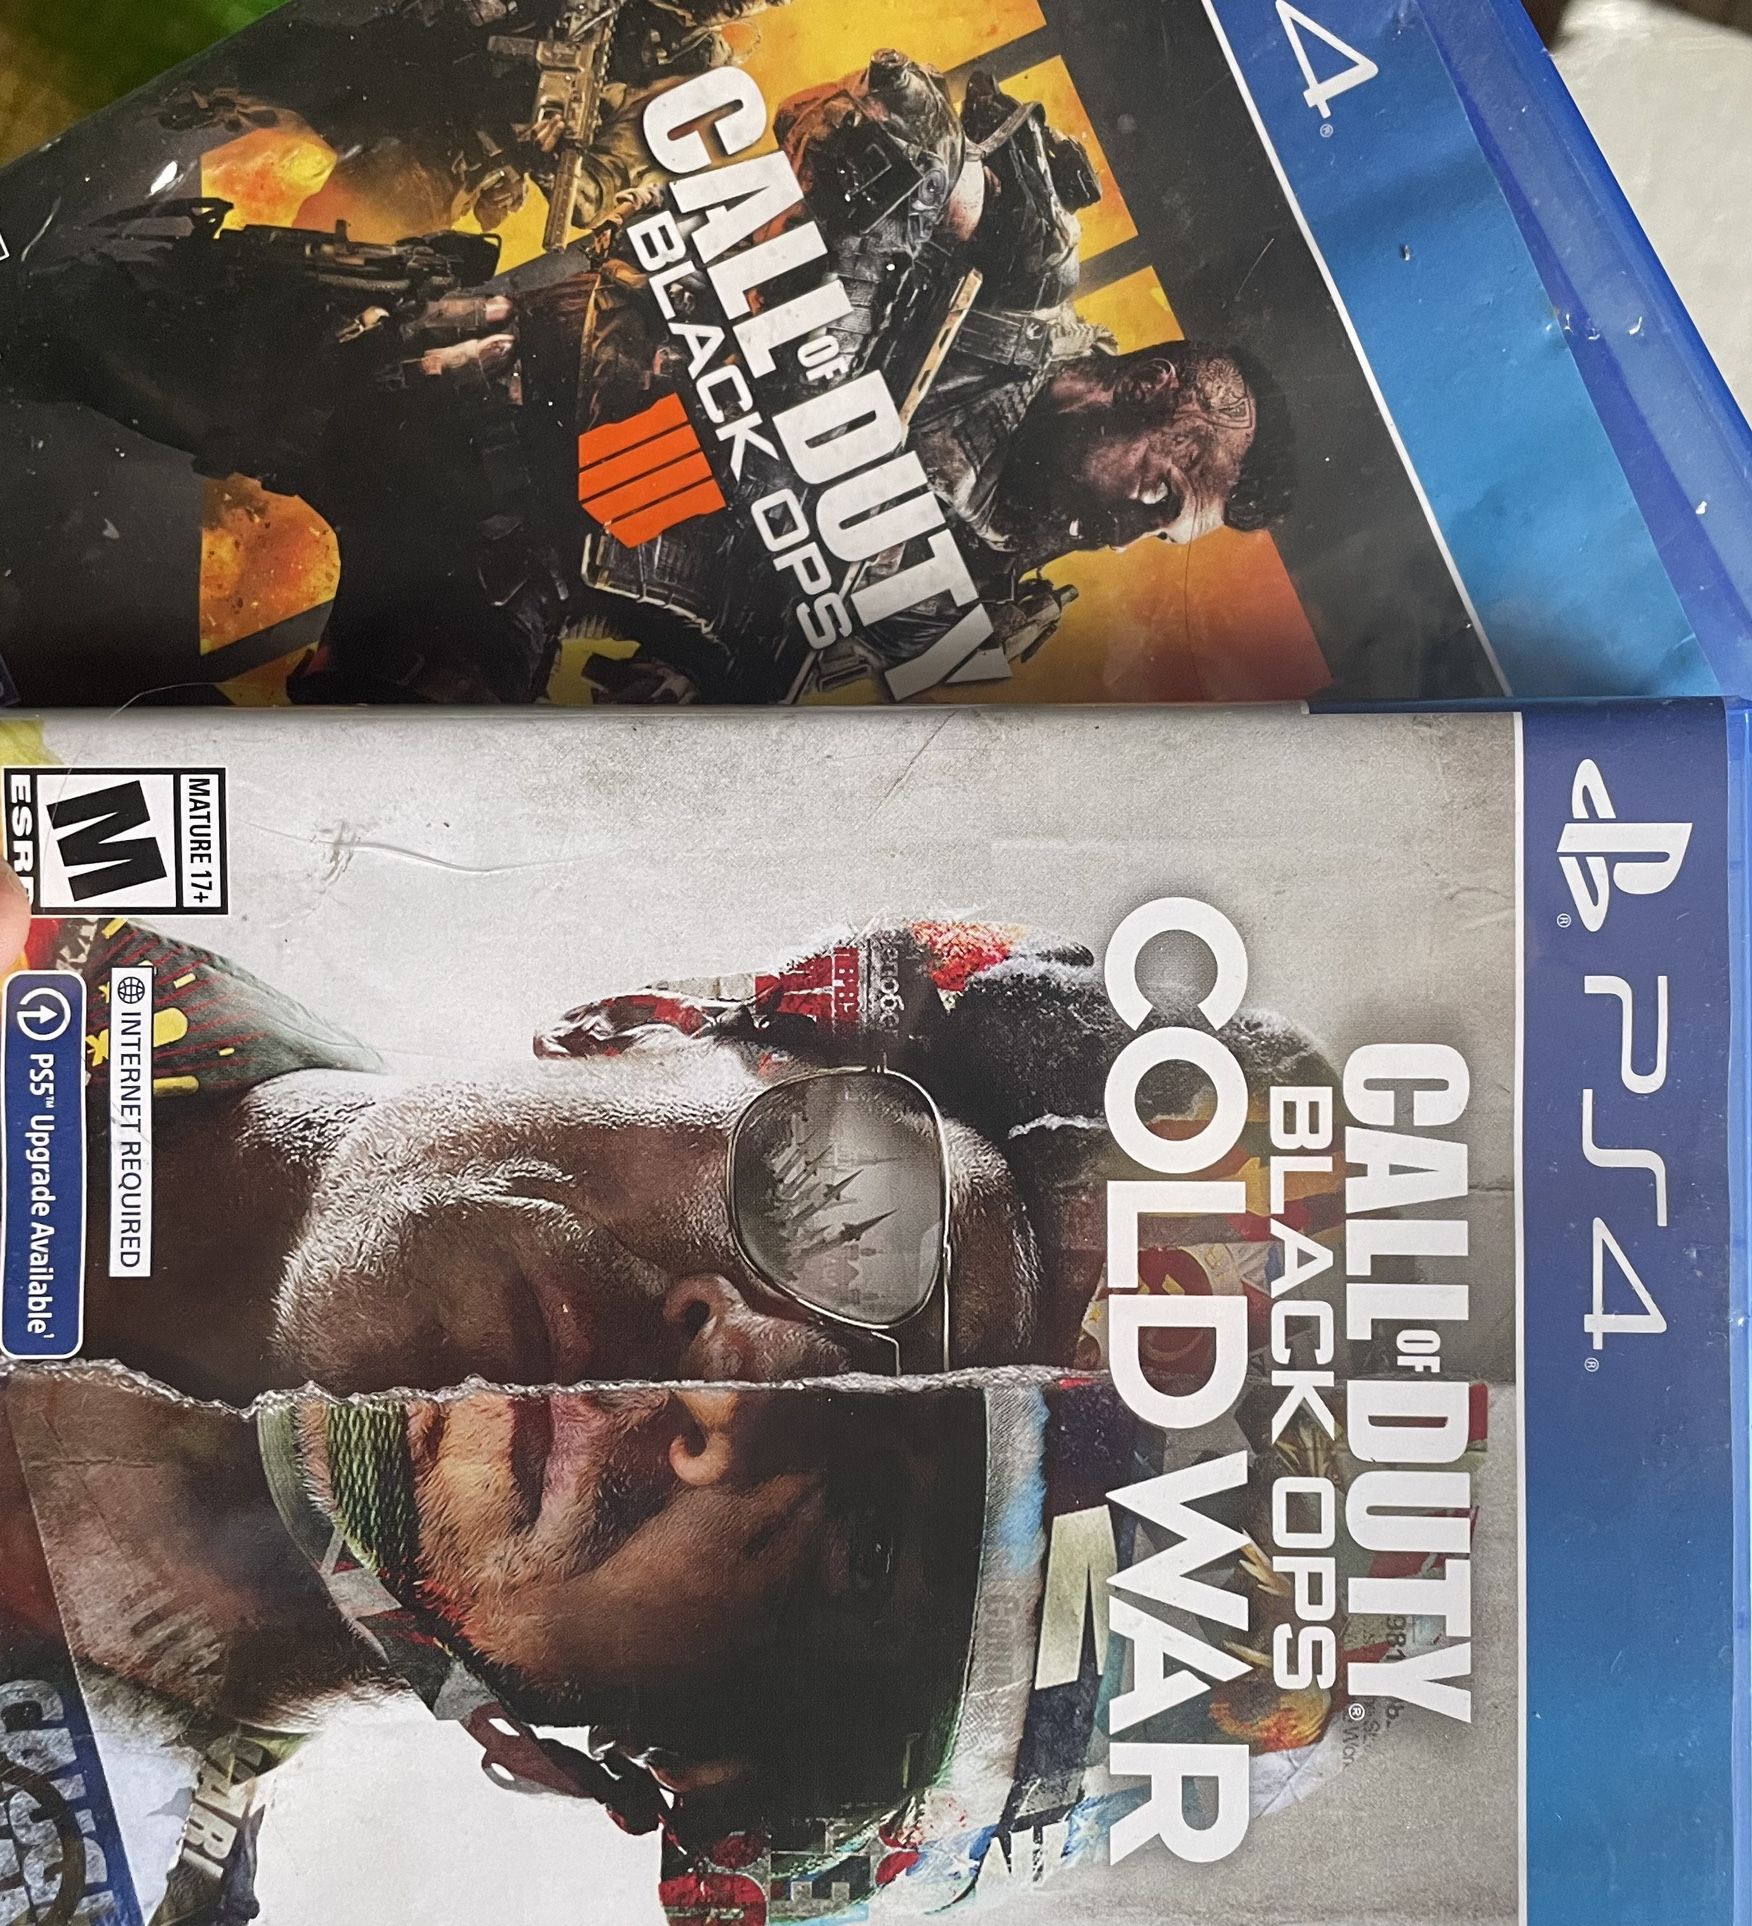 Used PS4 Games - Call Of Duty - Black Ops 4 - Black Ops: Cold War. 